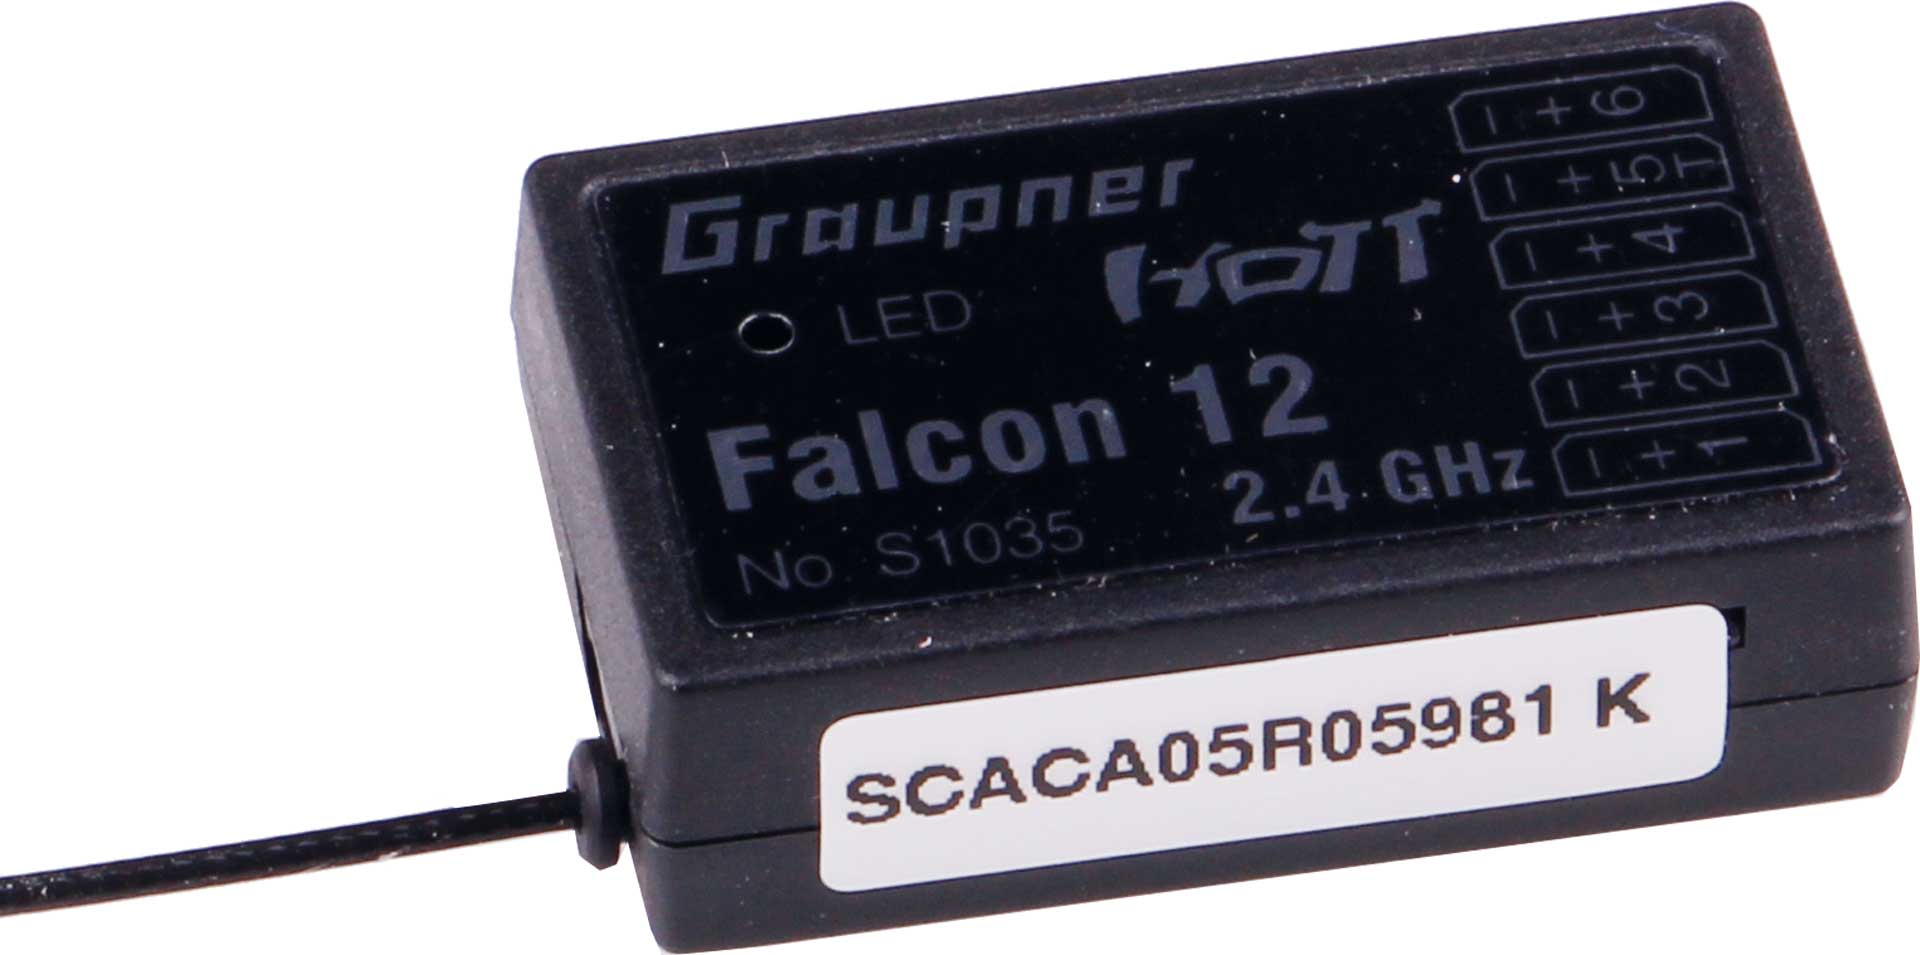 GRAUPNER FALCON 12 6-CHANNEL GYRO RECEIVER HOTT FOR SURFACE, HELI AND COPTER